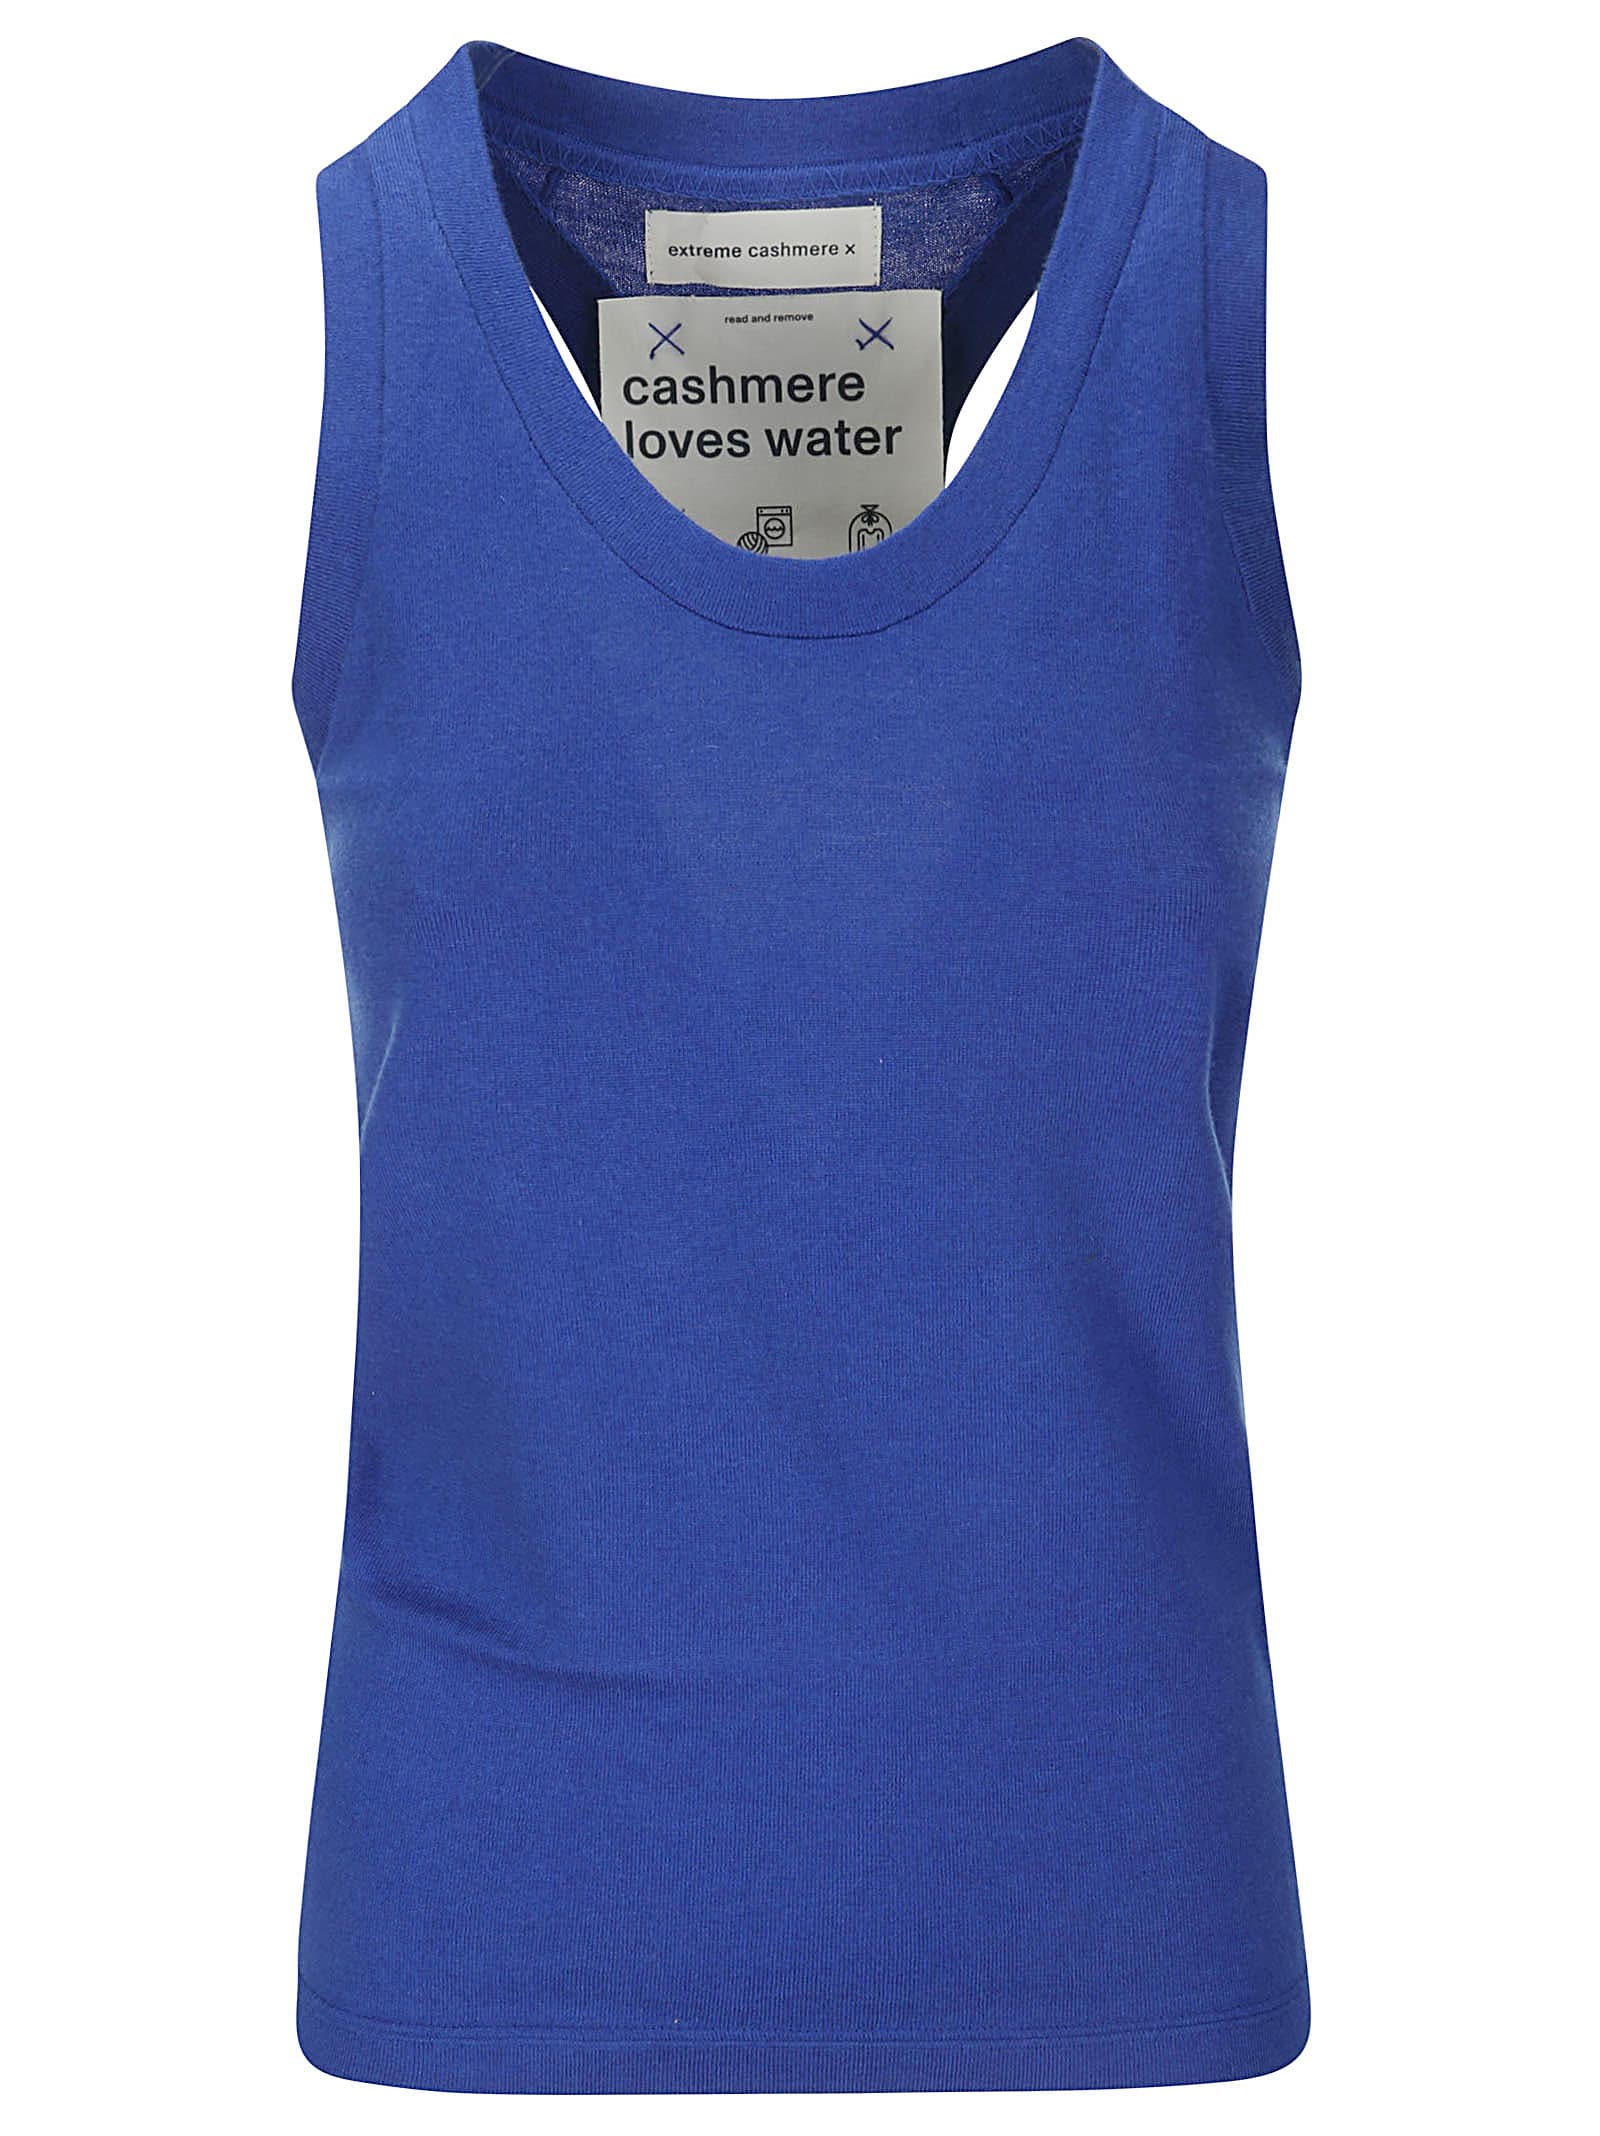 Extreme Cashmere Vest In Primary Blue